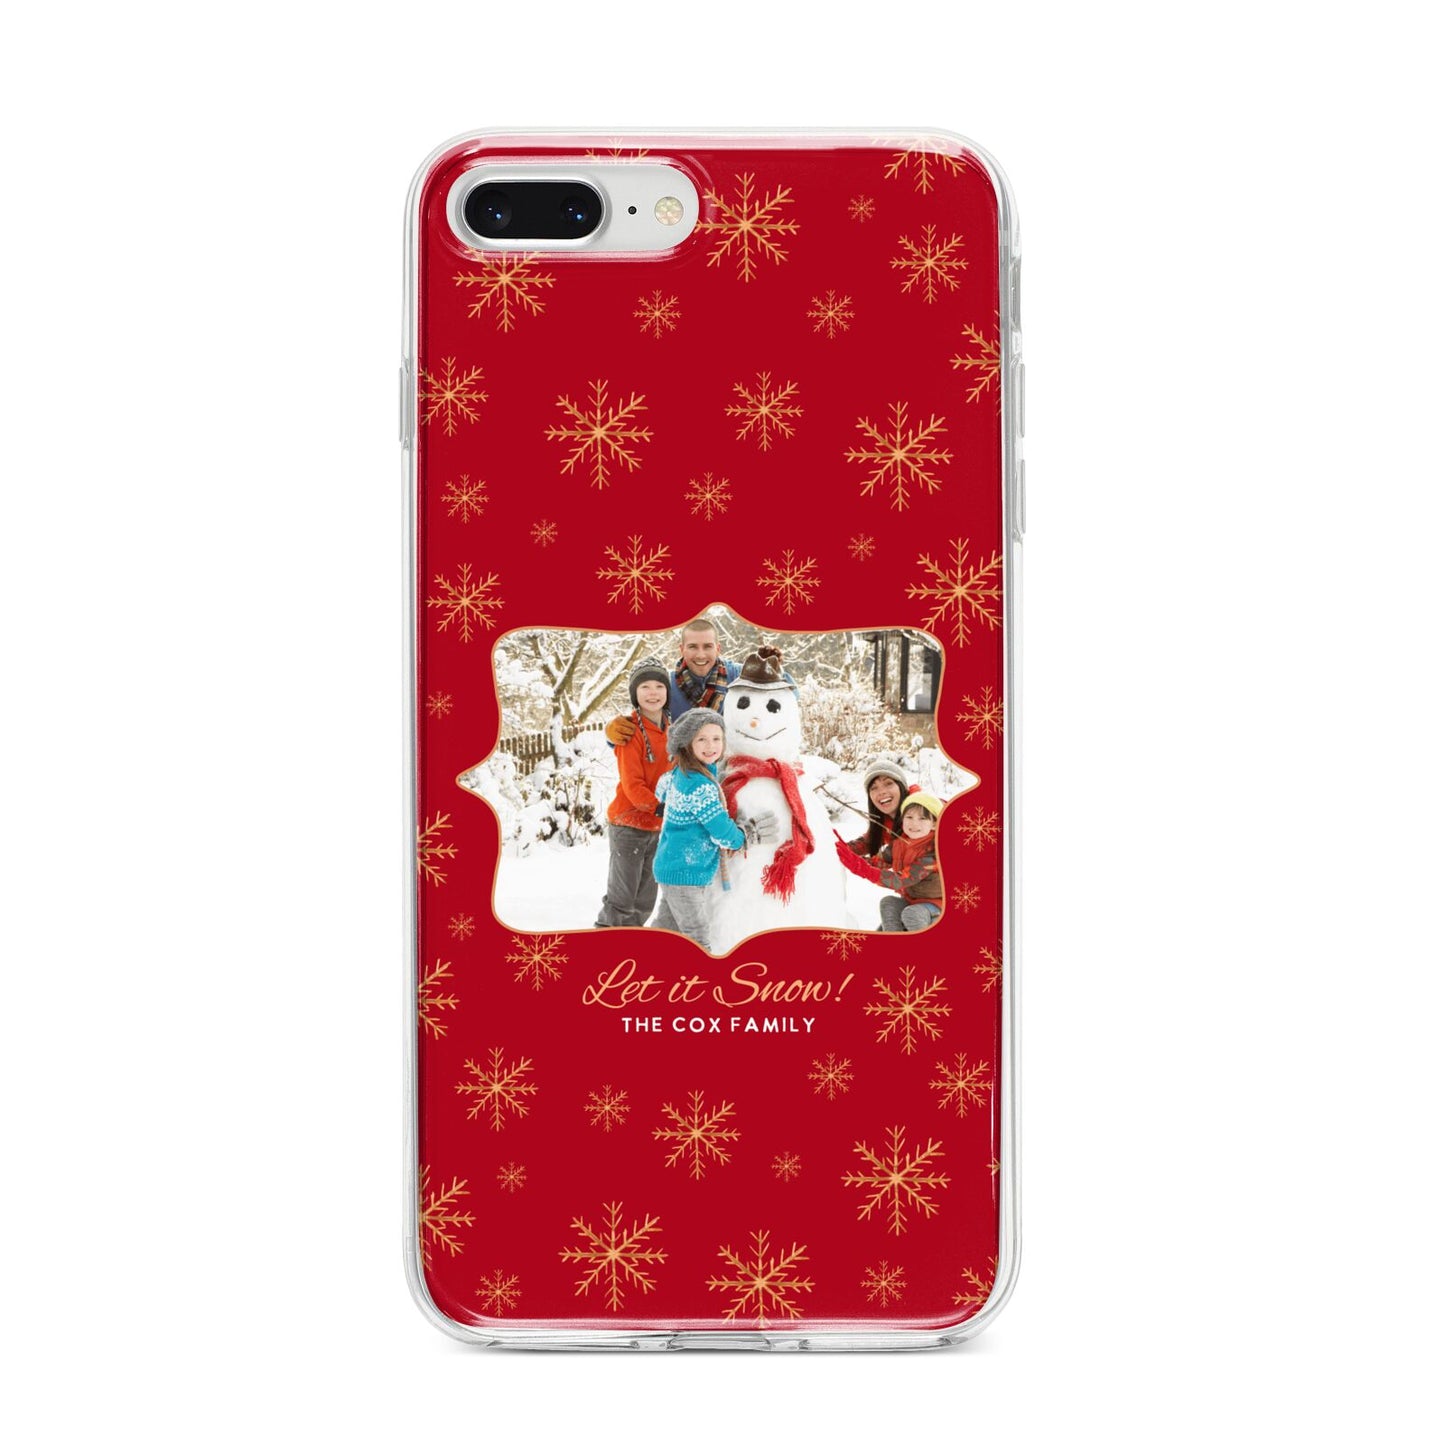 Let it Snow Christmas Photo Upload iPhone 8 Plus Bumper Case on Silver iPhone